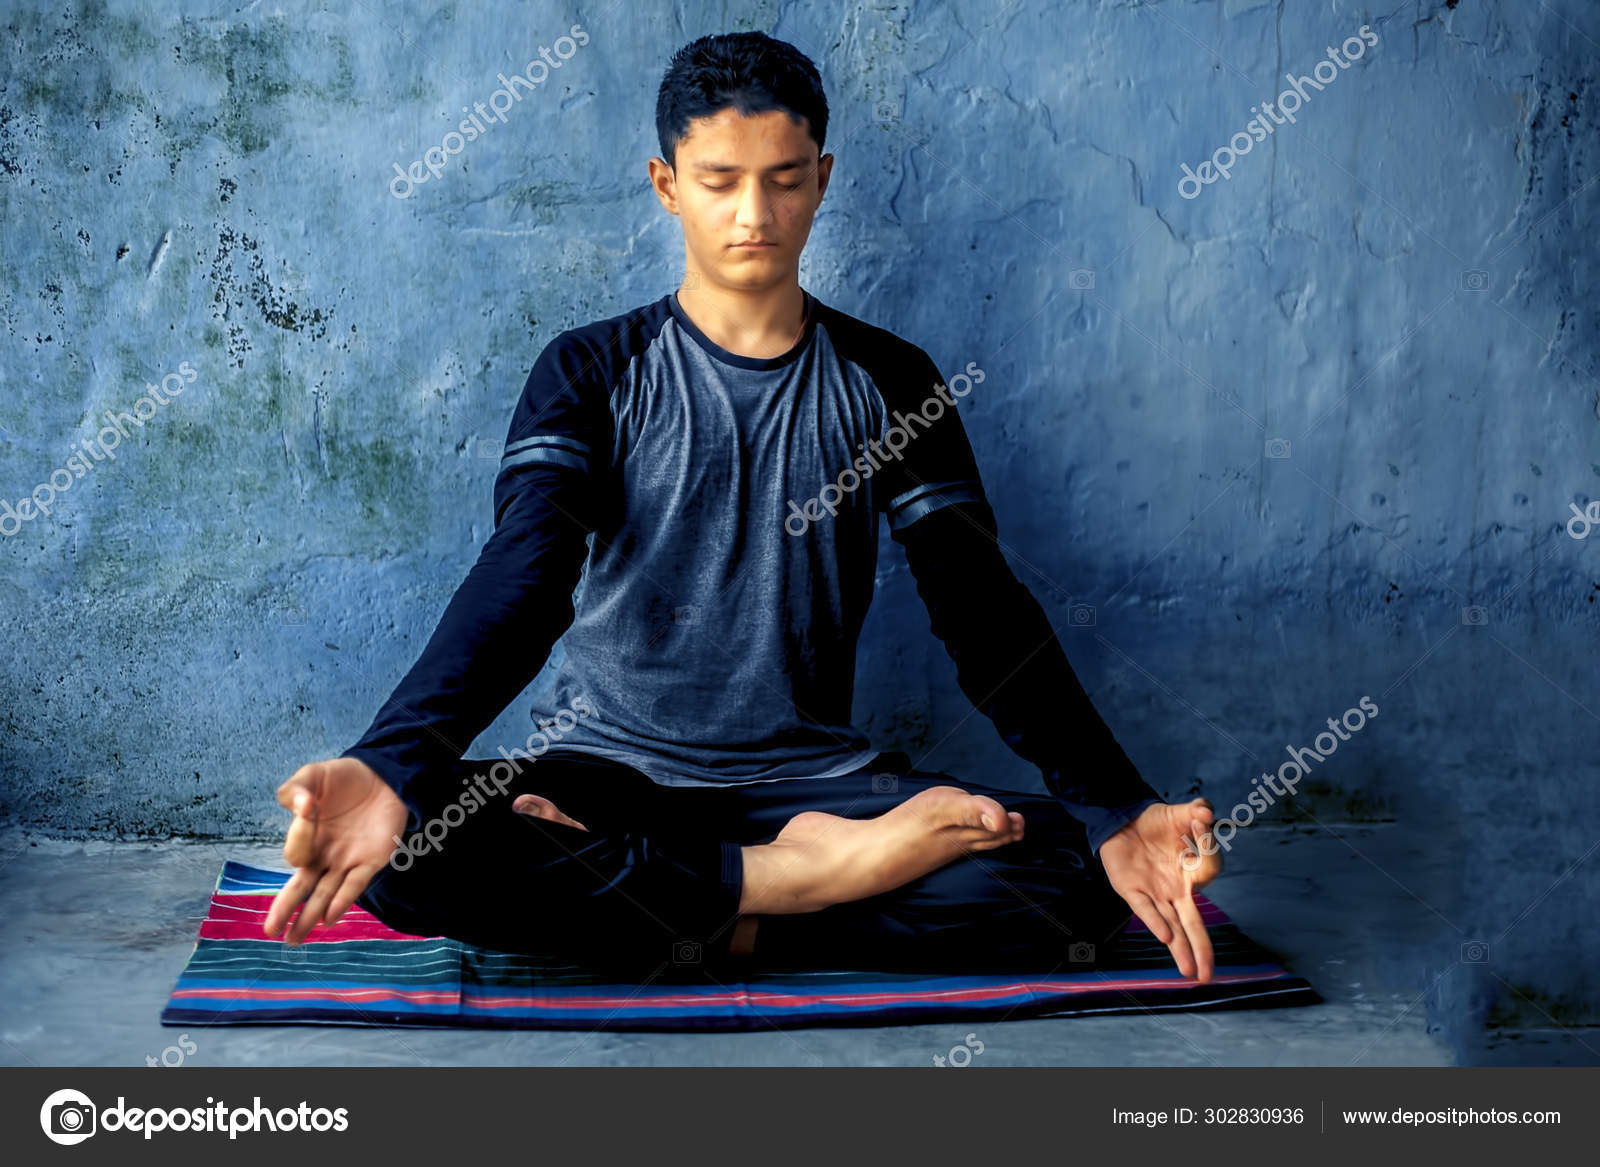 Tummee.com - View, learn and teach over 26 Easy Pose Variations at  https://www.tummee.com/yoga-poses/easy-pose/variations Sukhasana (Easy Pose)  title comes from the Sanskrit word 'Sukha' meaning 'Pleasure'. This pose is  a meditative pose and